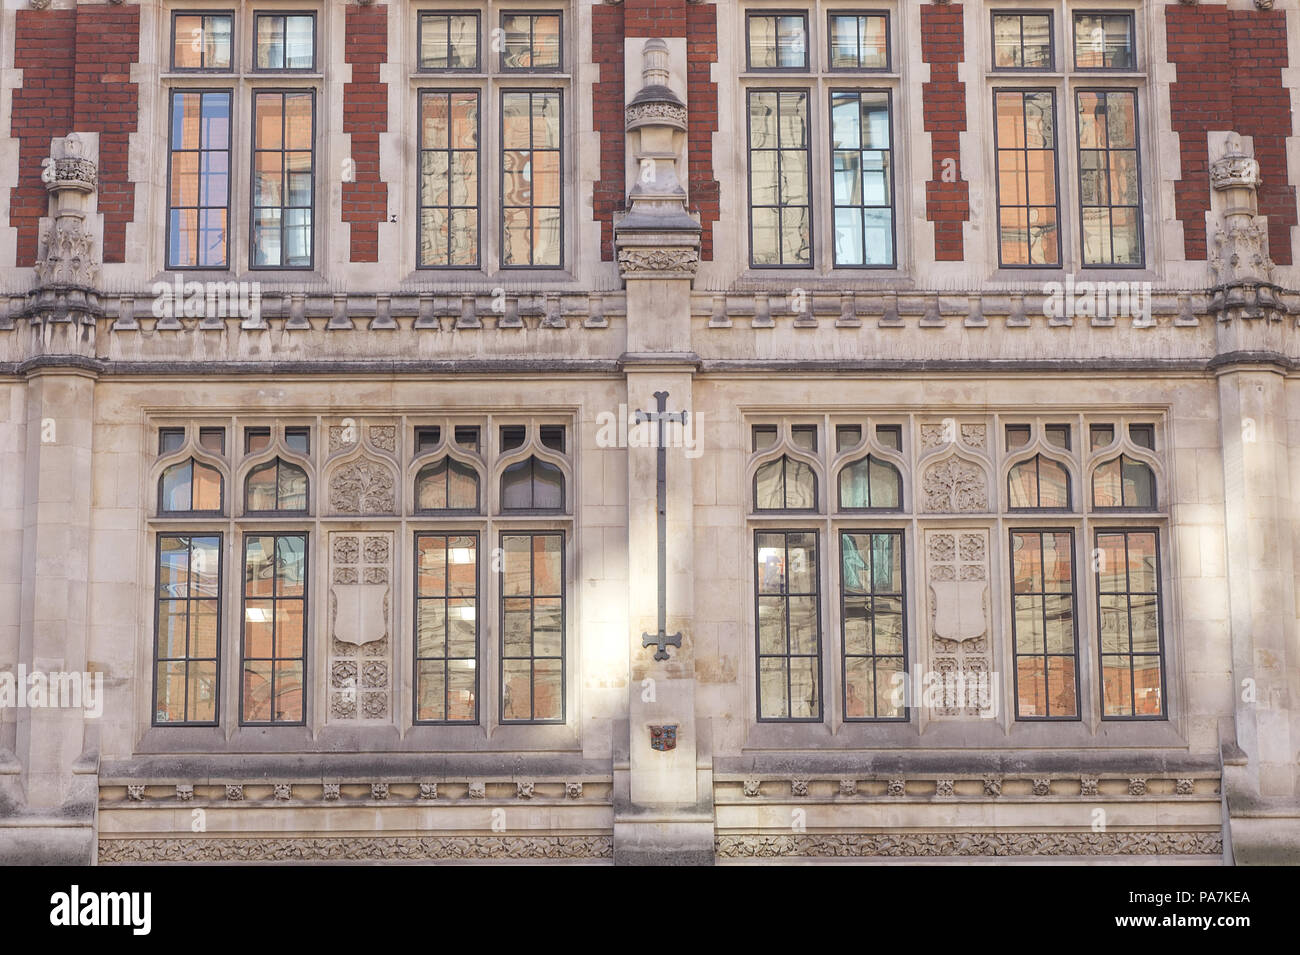 Decorative Building in the heart of London Stock Photo